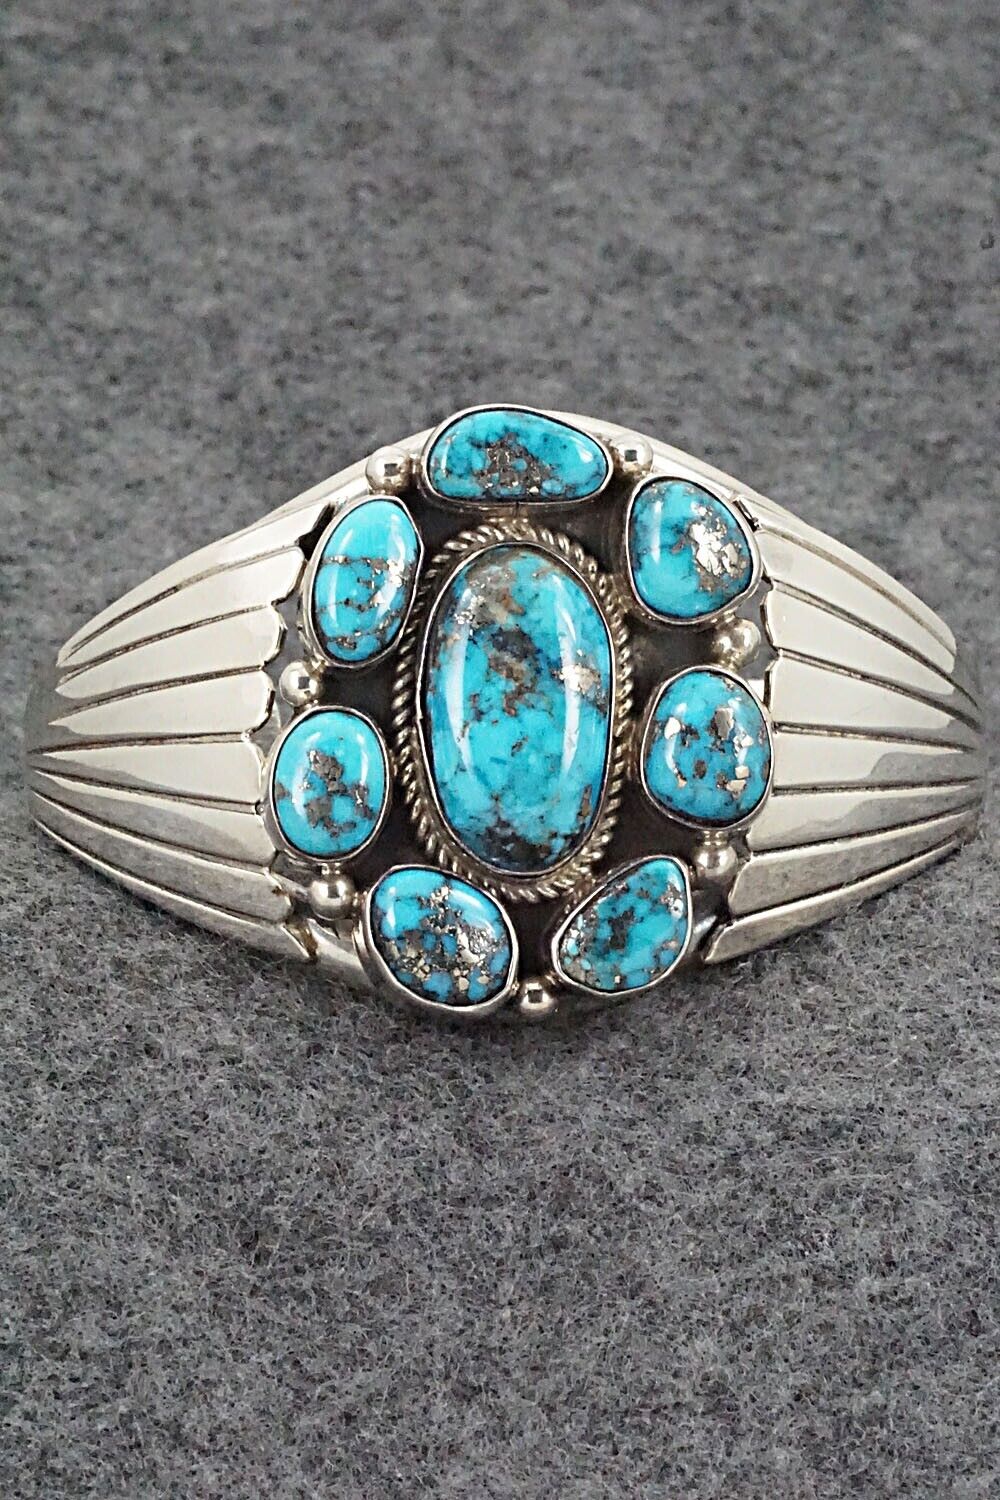 Turquoise and Sterling Silver Bracelet - Ted Brea